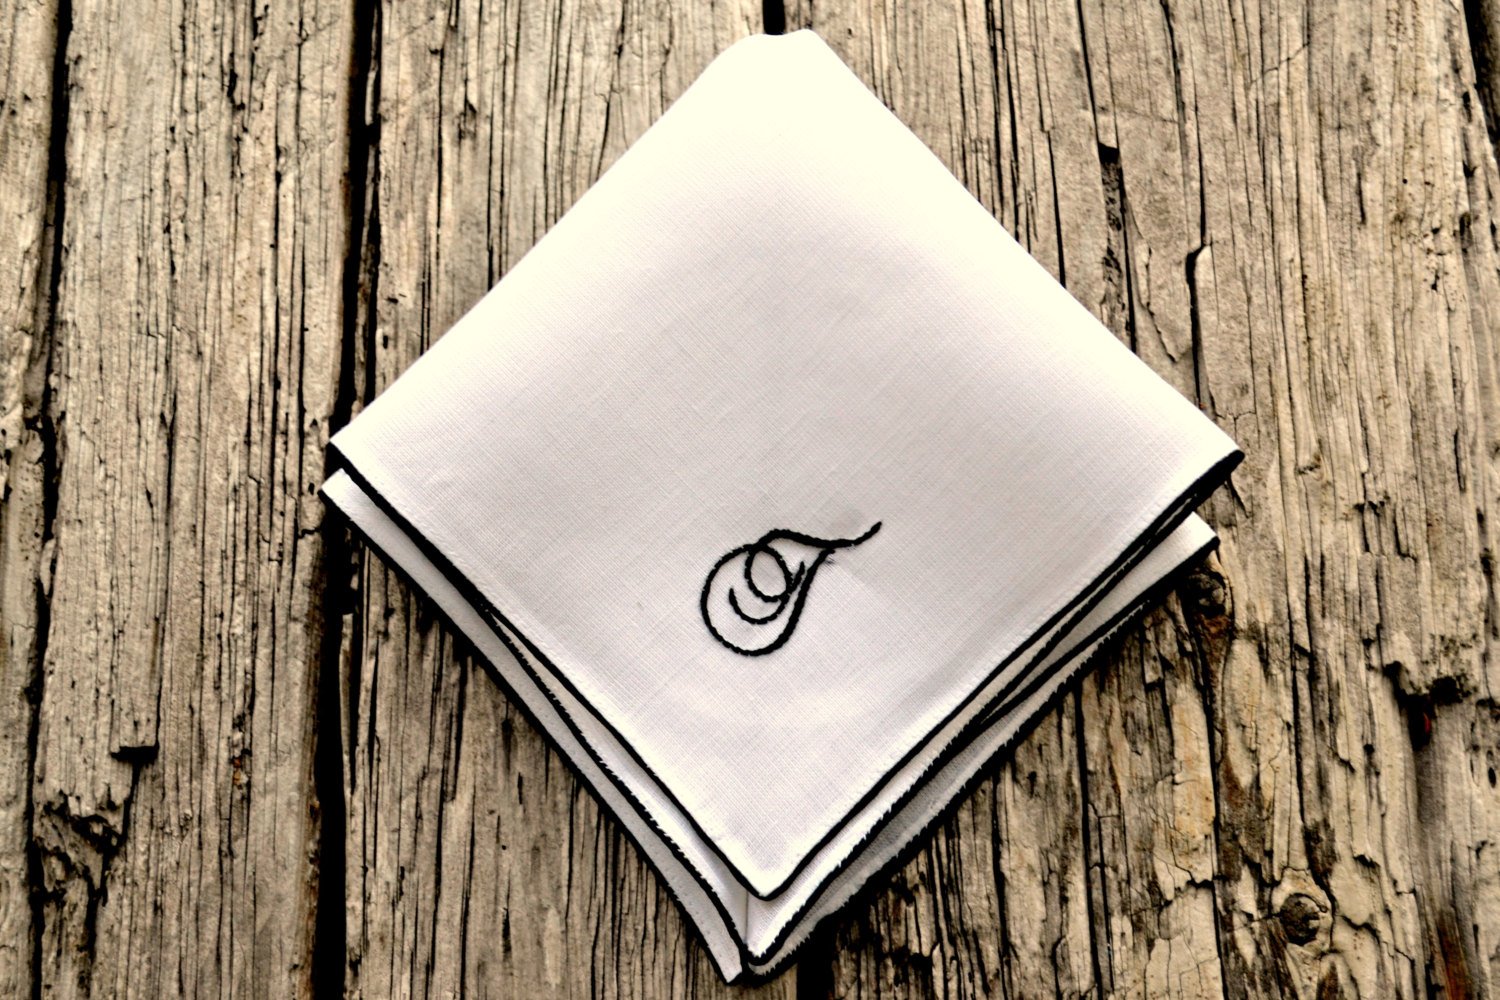 White linen handkerchief with satin border and script letter T in black